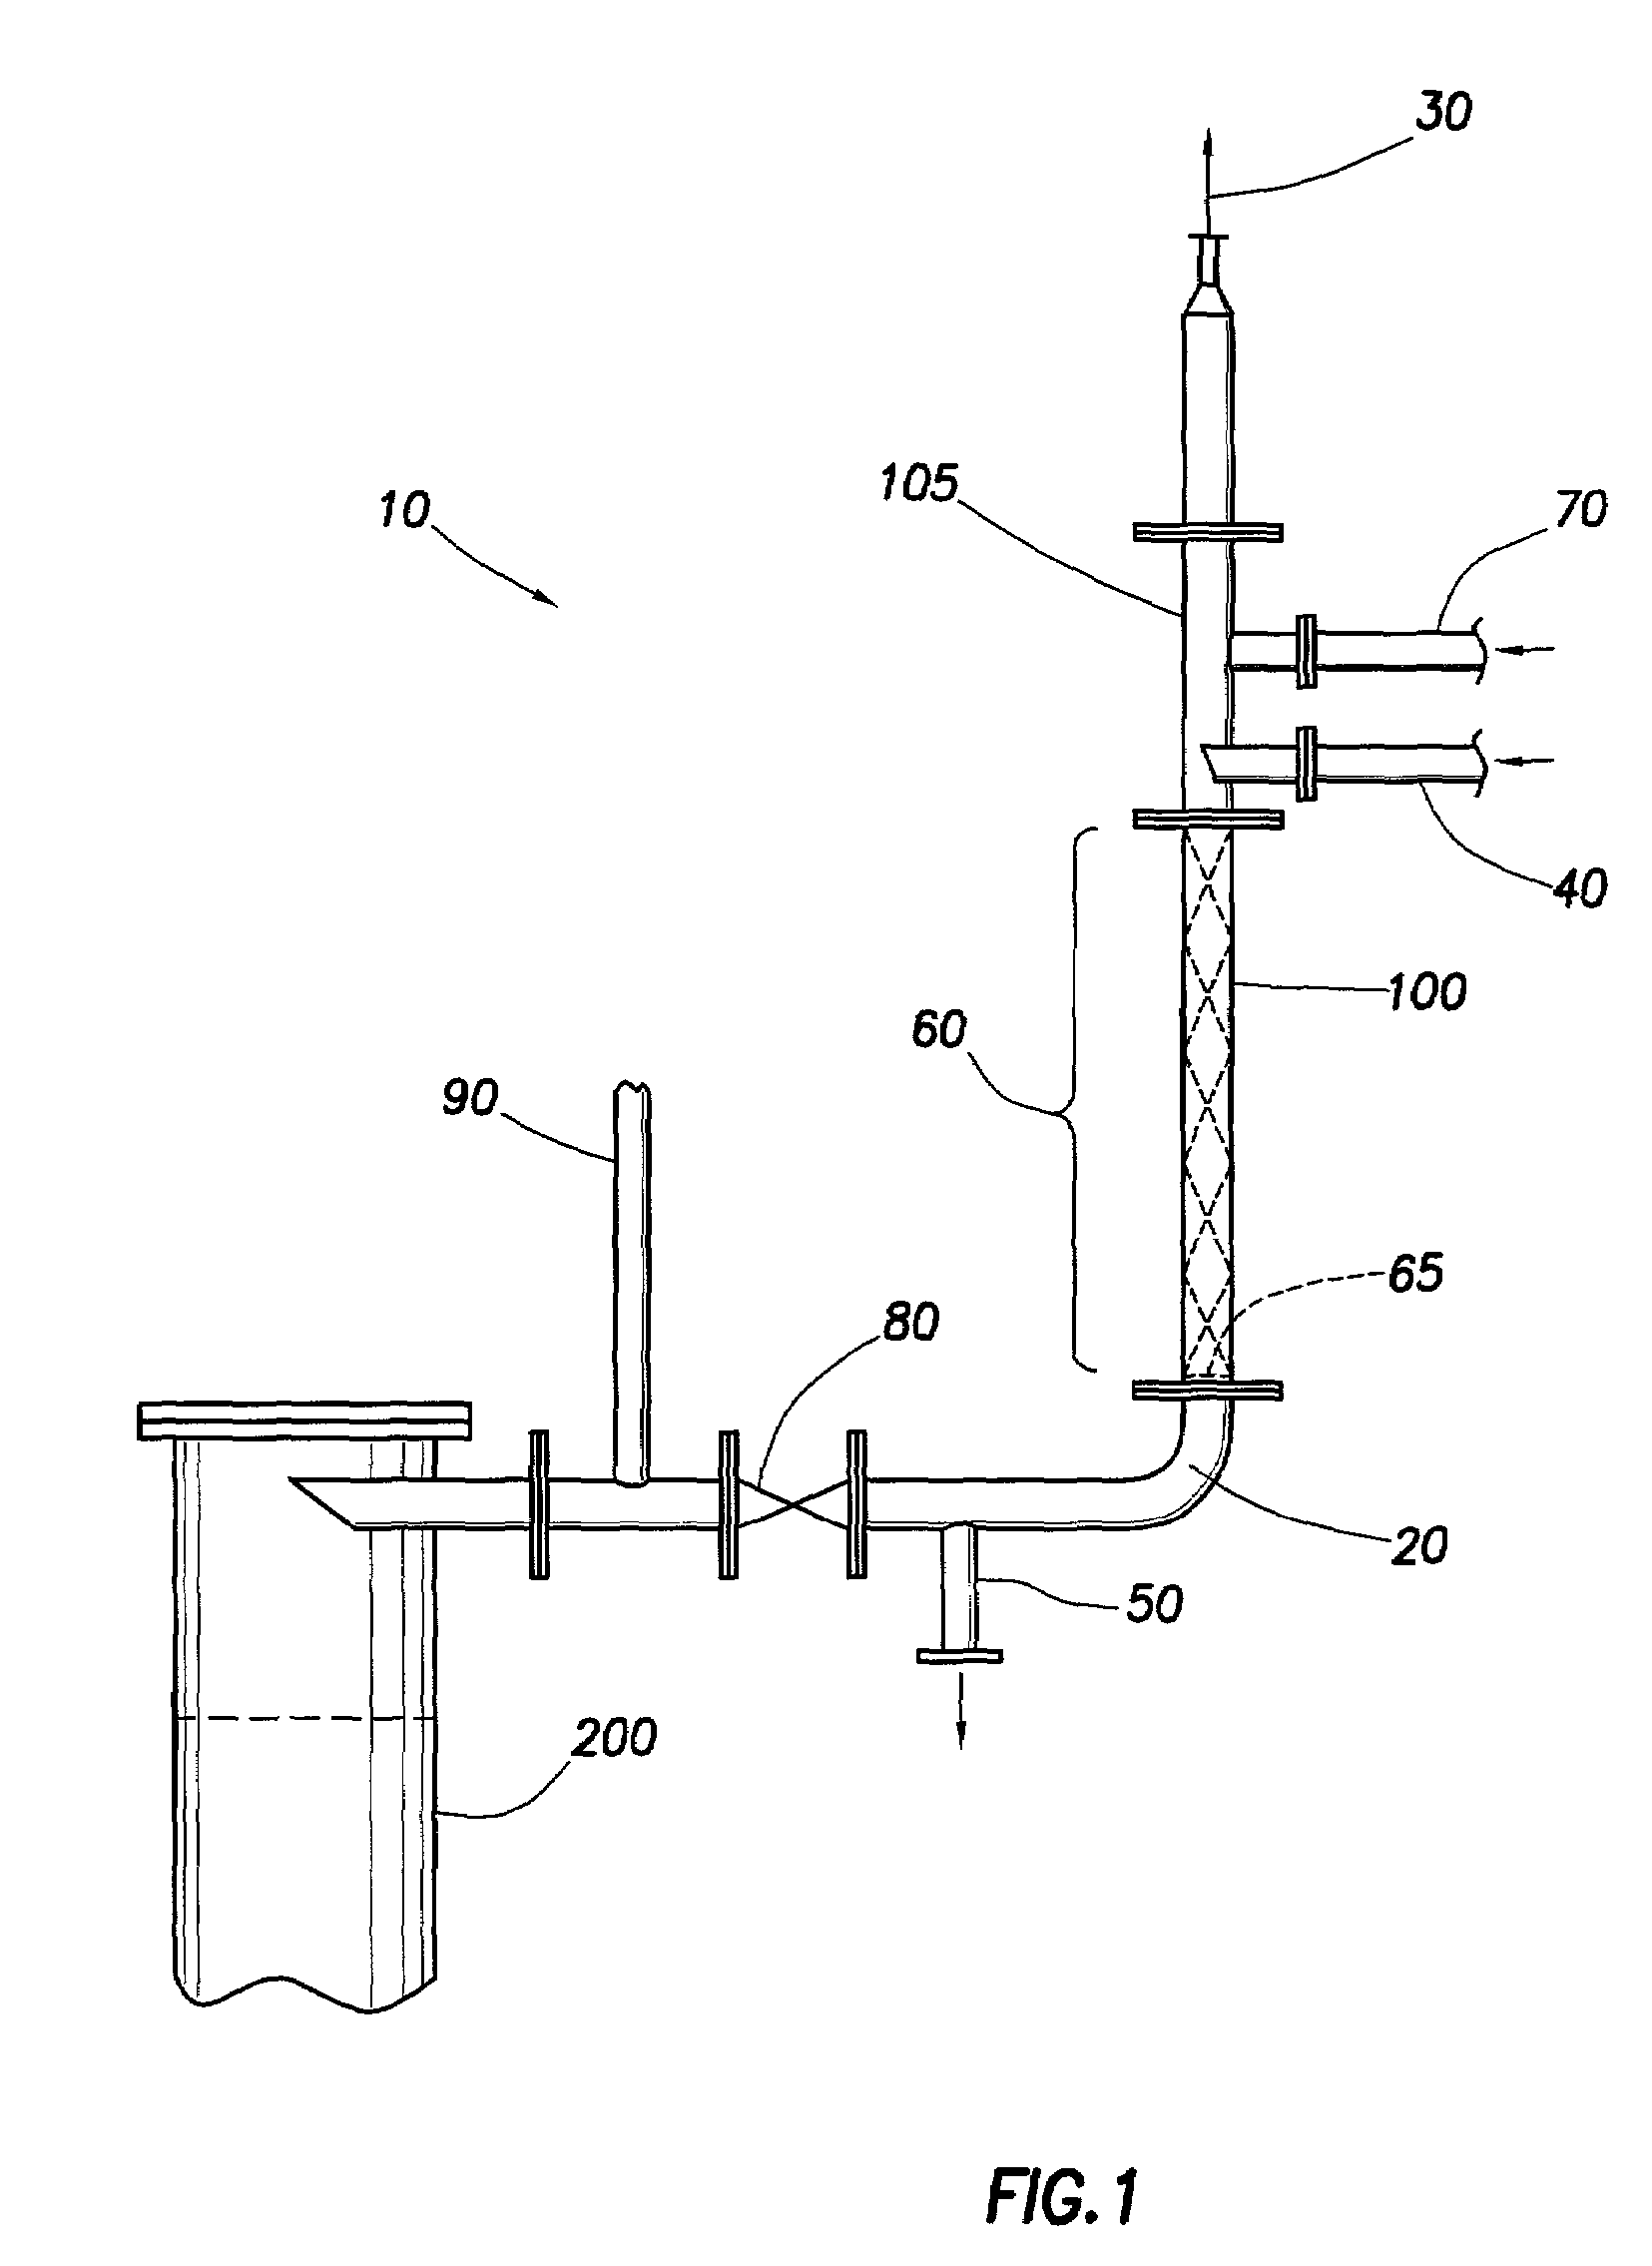 Process for removing sulfides